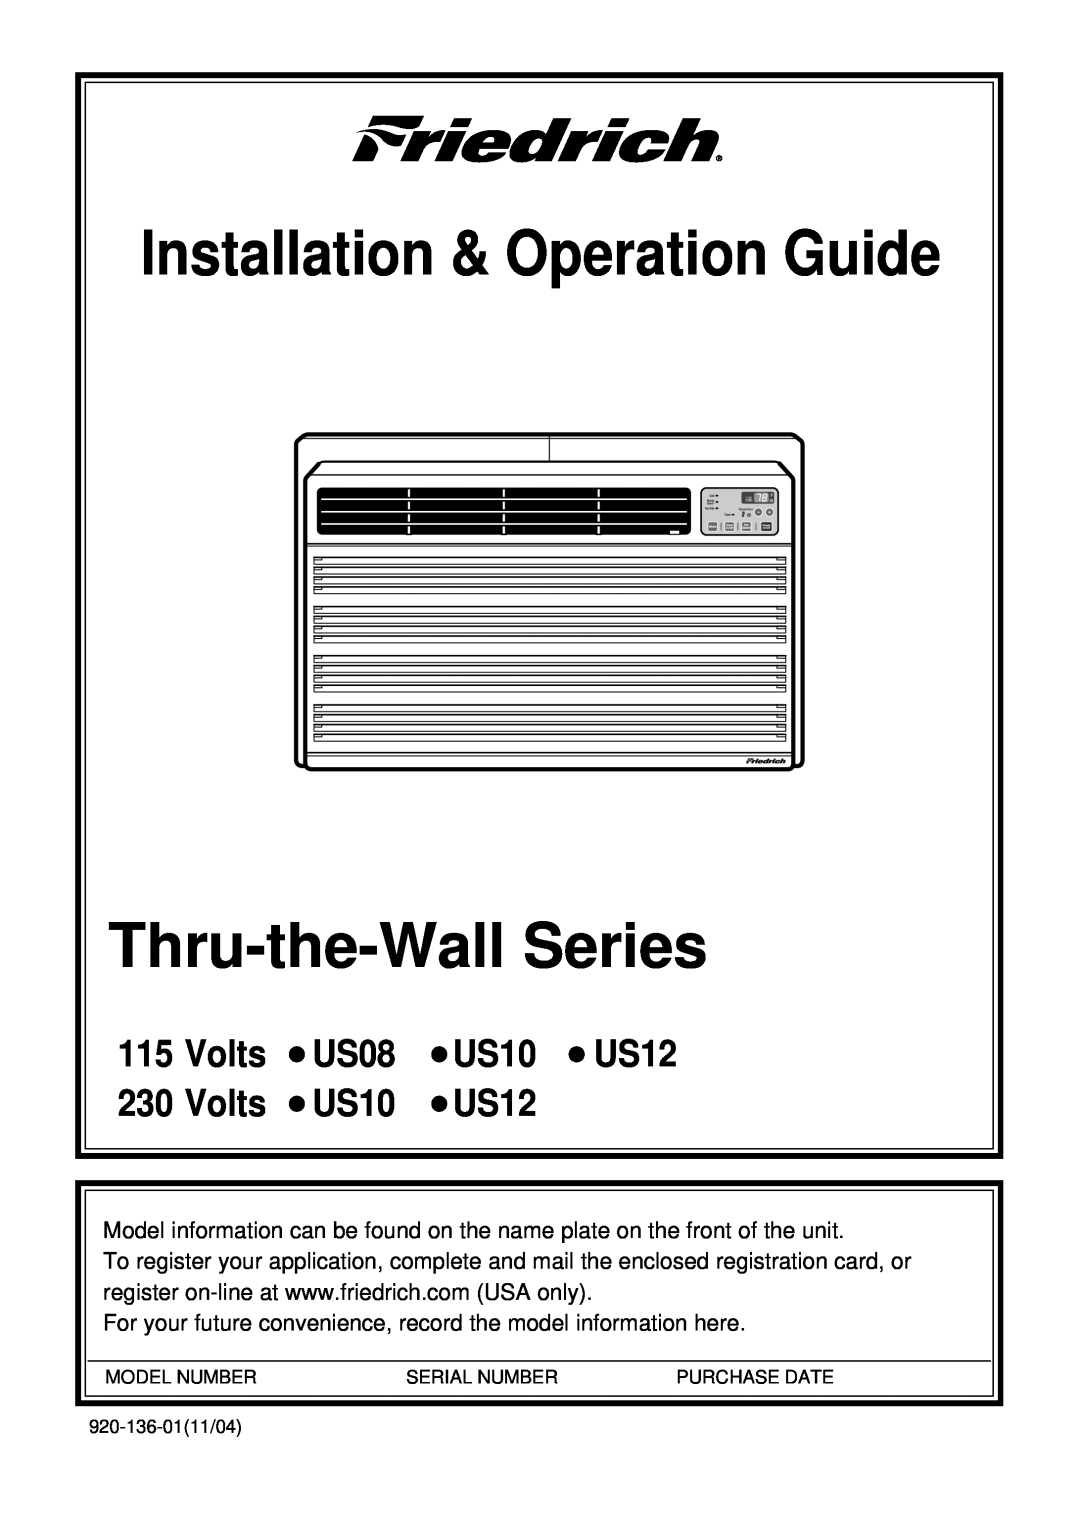 Friedrich US08, US10, US12 manual Installation & Operation Guide, Thru-the-WallSeries, Volts 